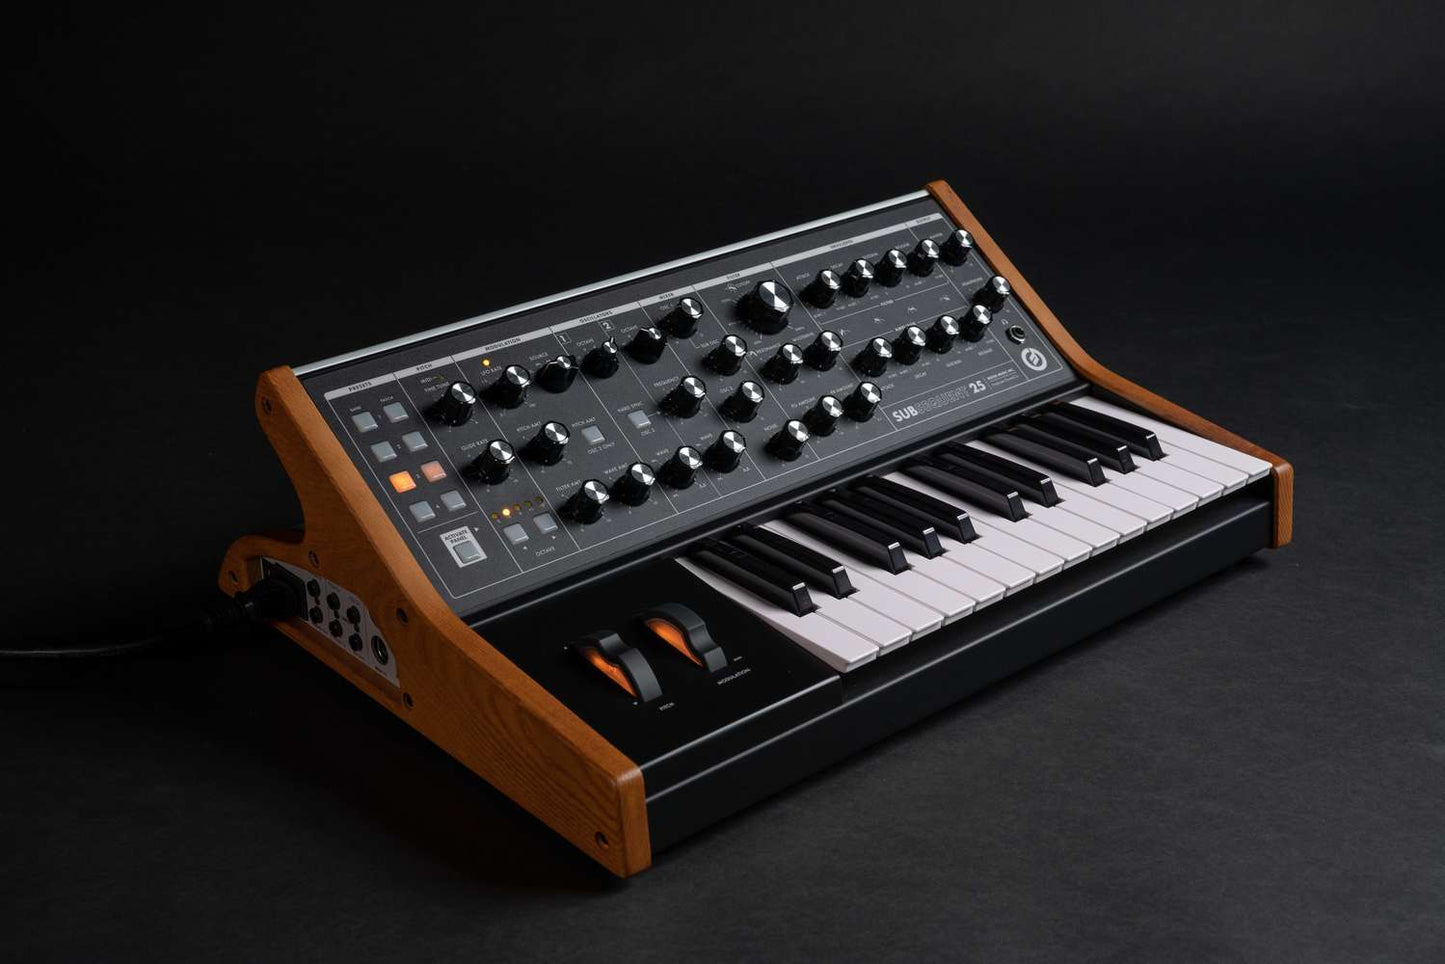 Moog Subsequent 25 2-Note Paraphonic Analog Synthesizer